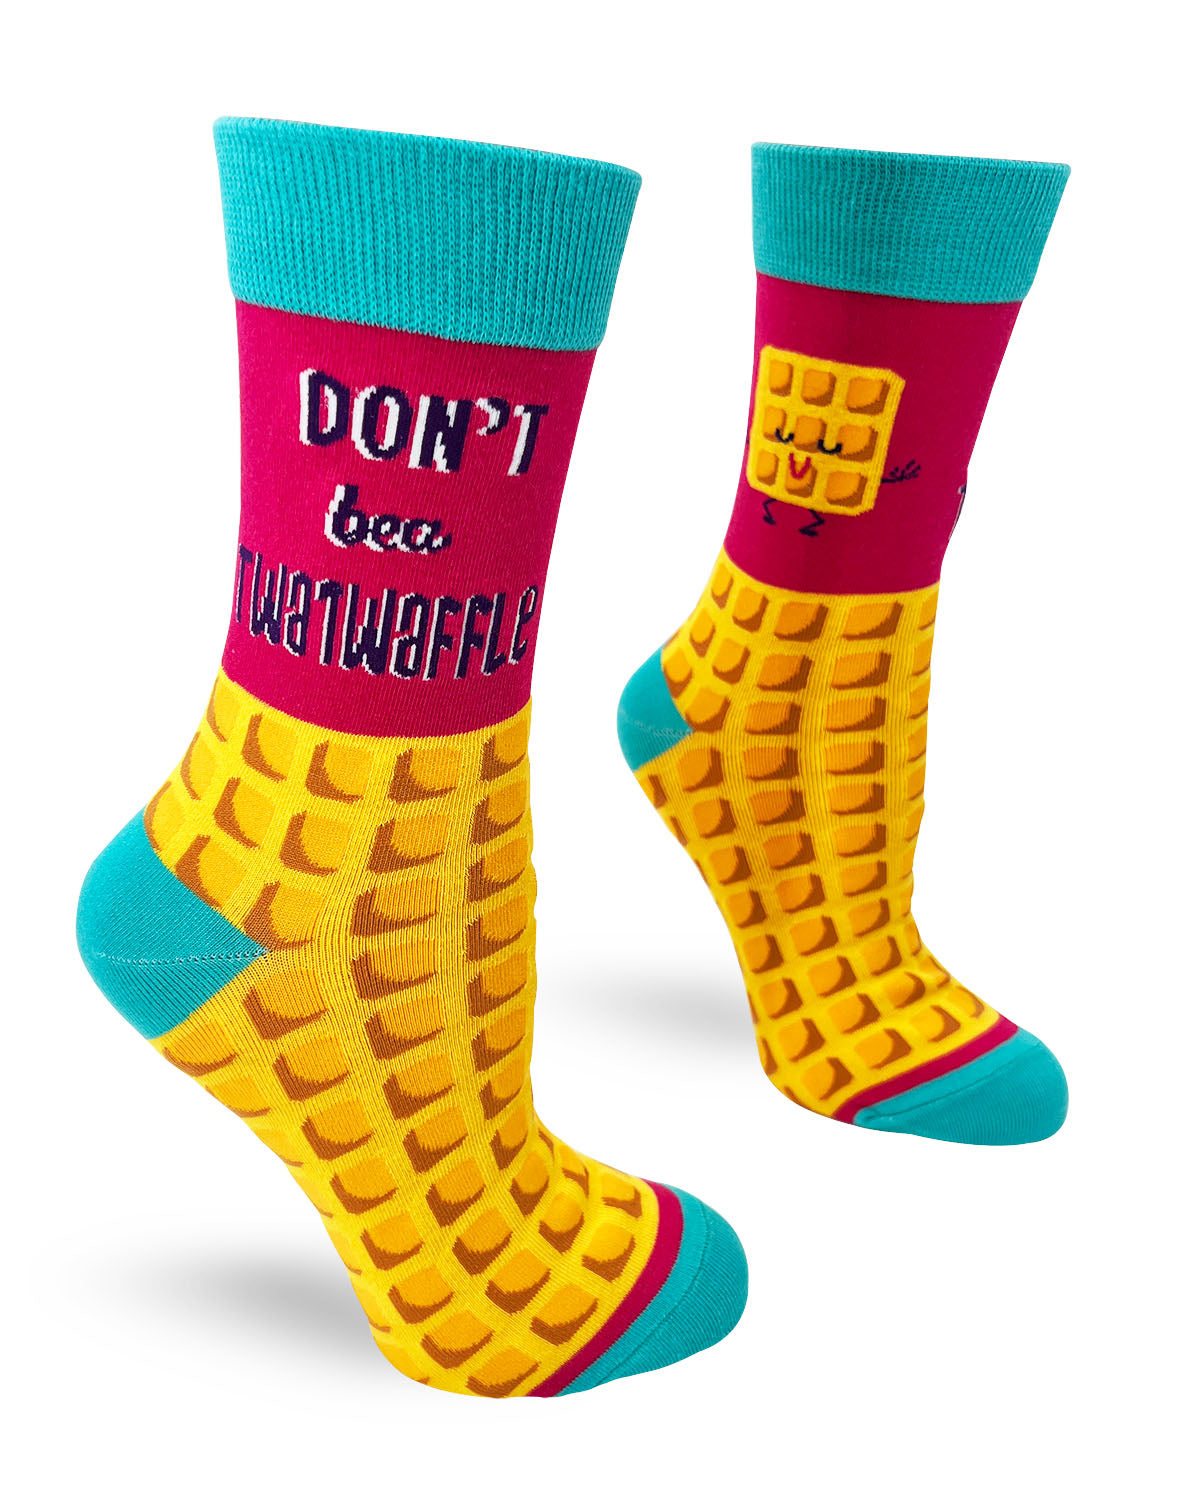 Funny ladies novelty crew socks with saying "Don't Be a Twatwaffle"